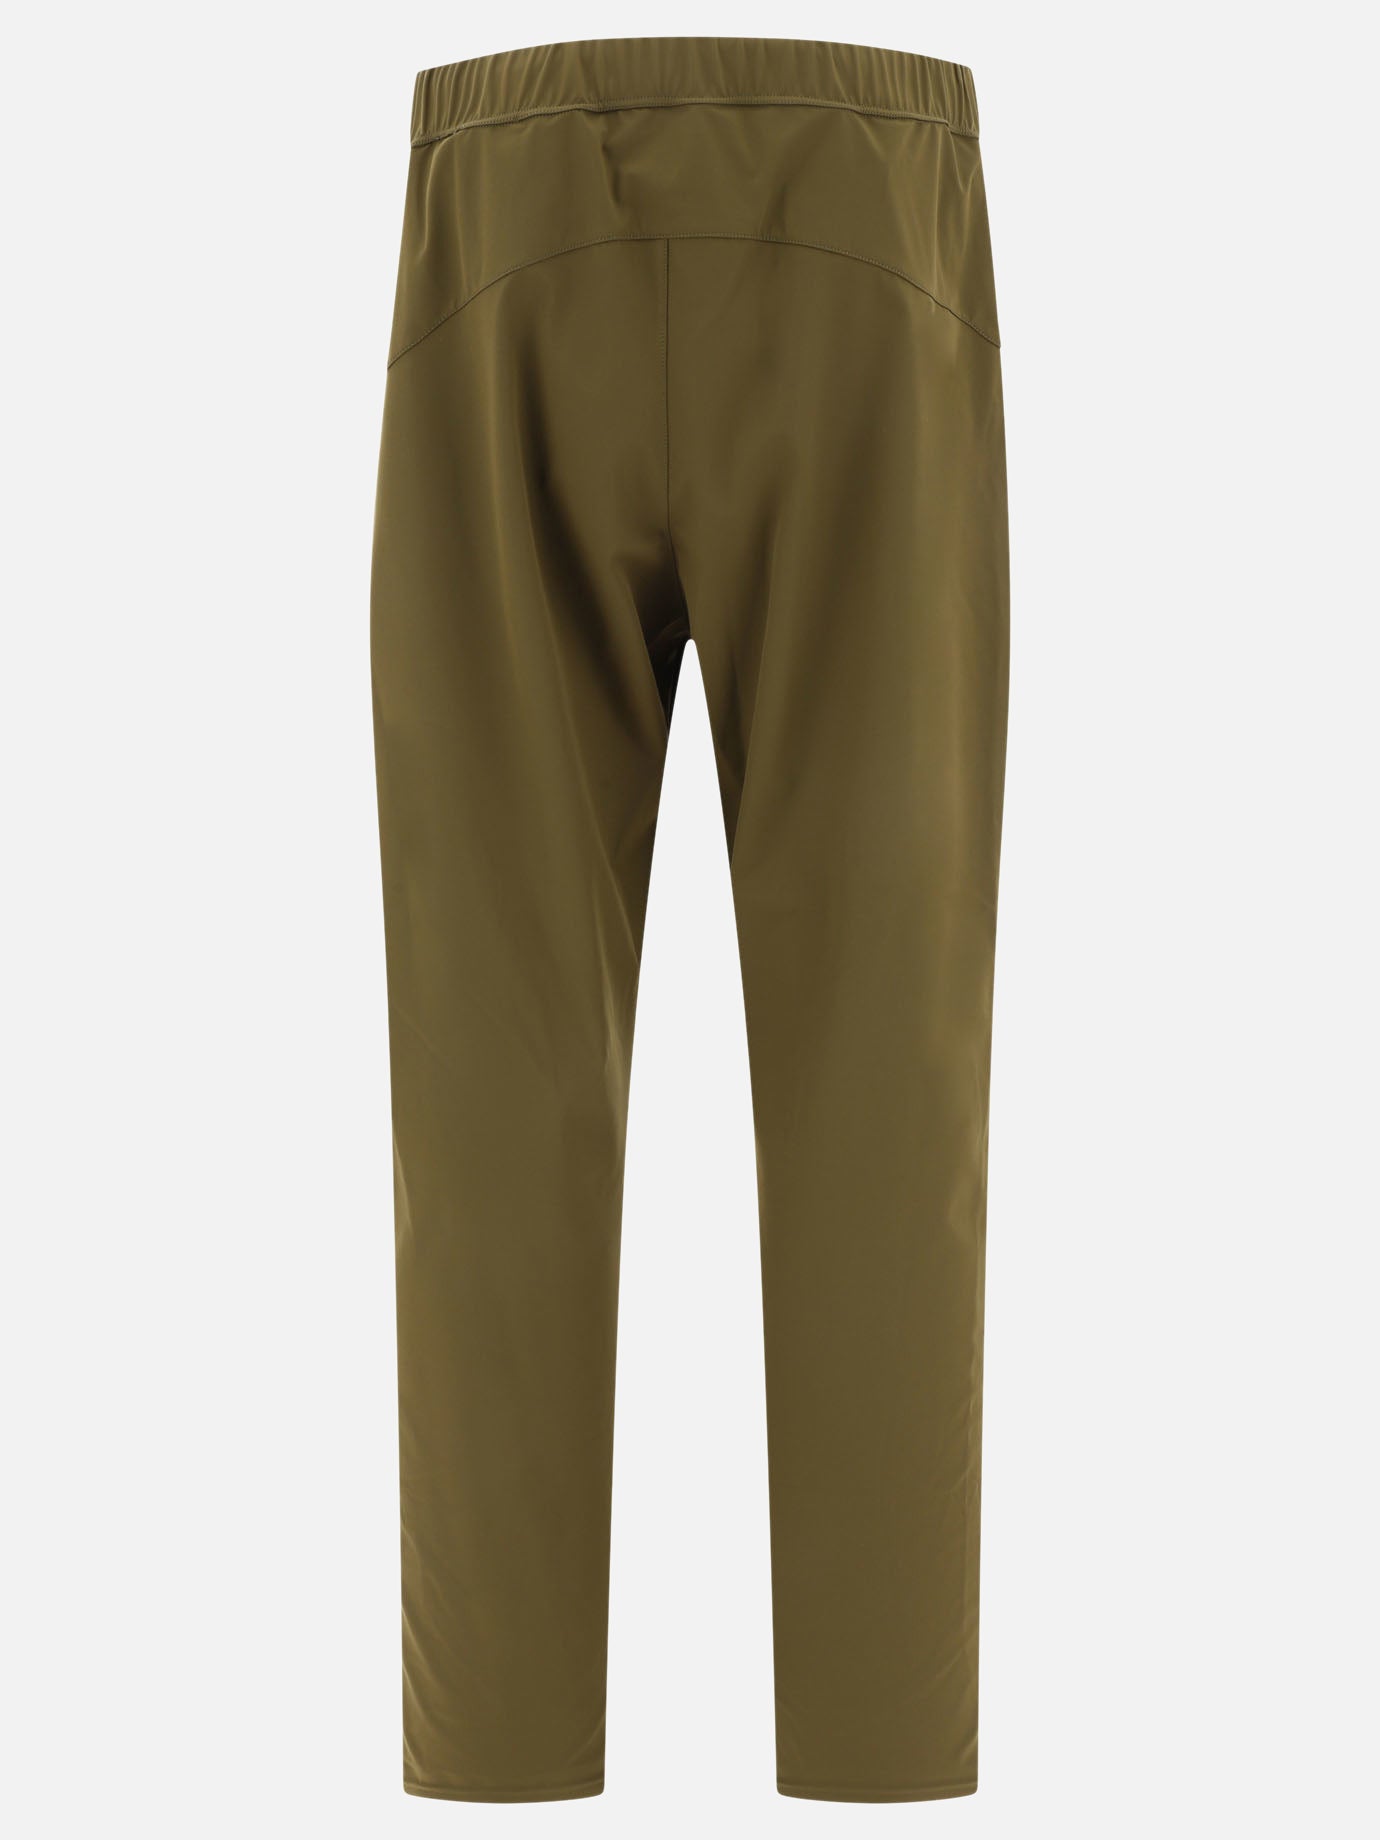 "Performance" trousers